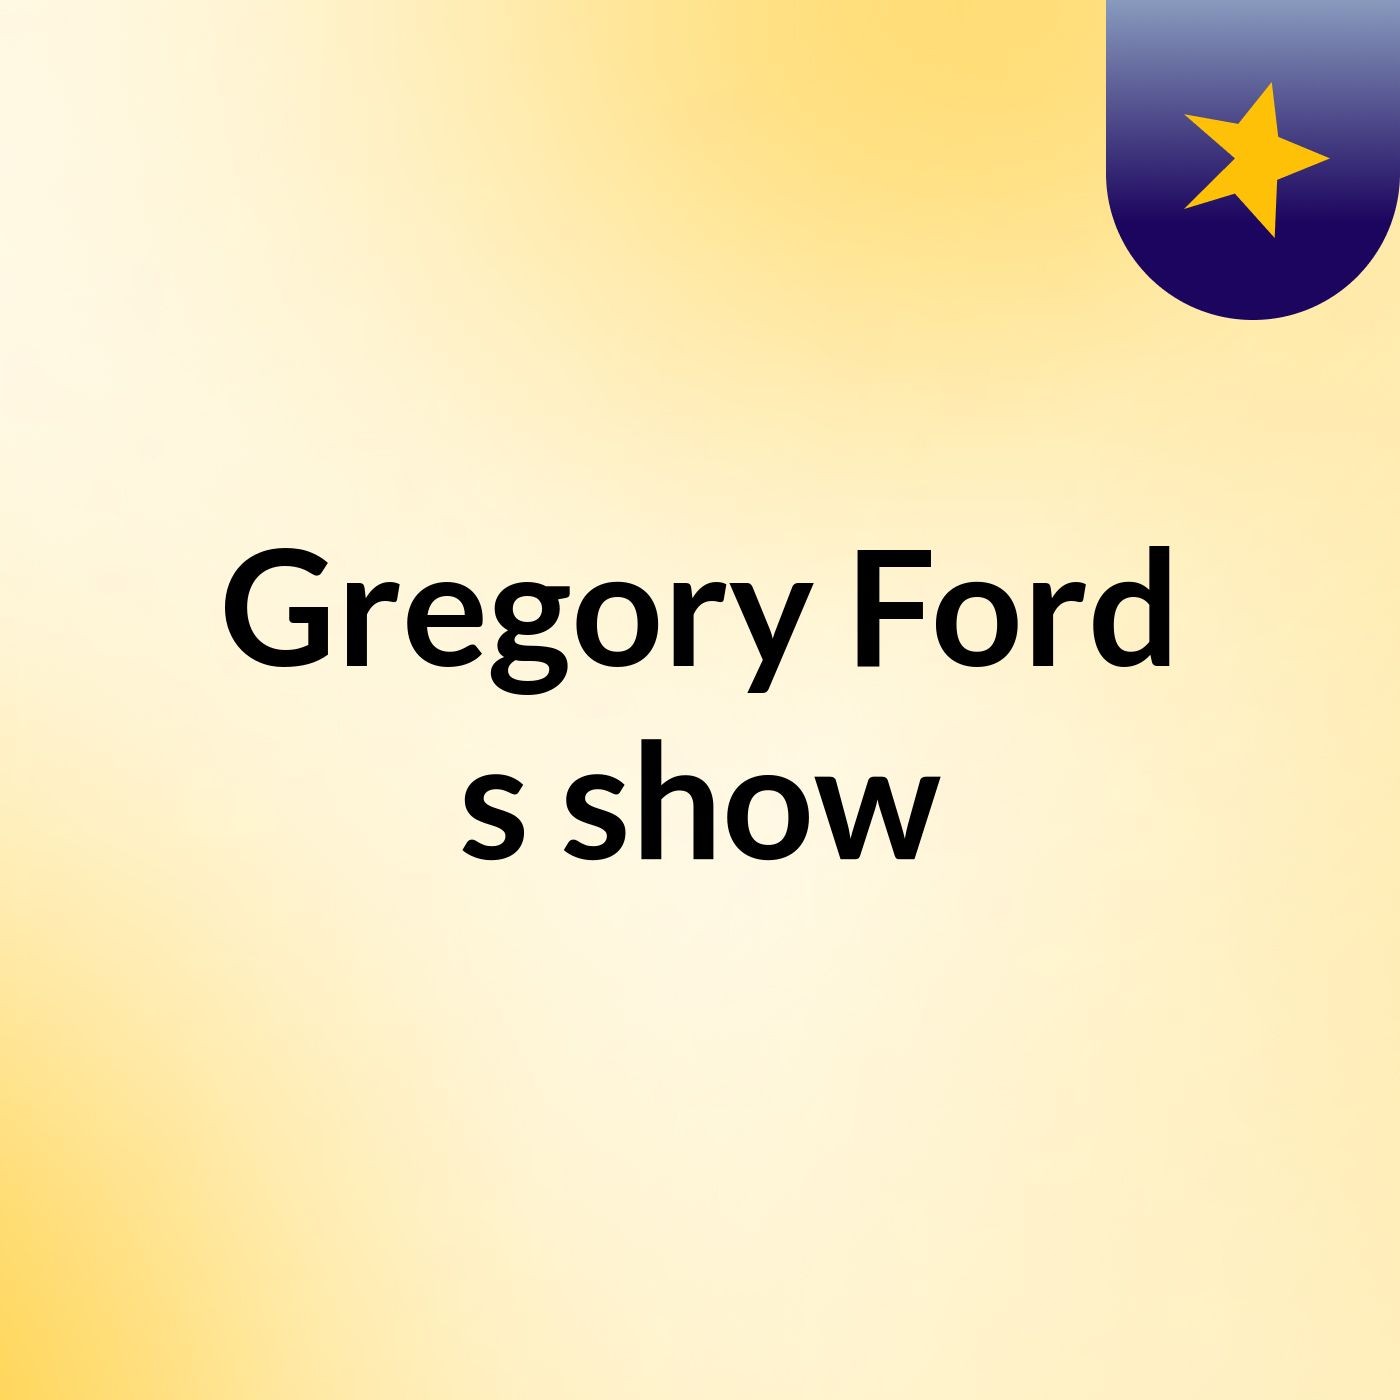 Episode 15 - Gregory Ford's show